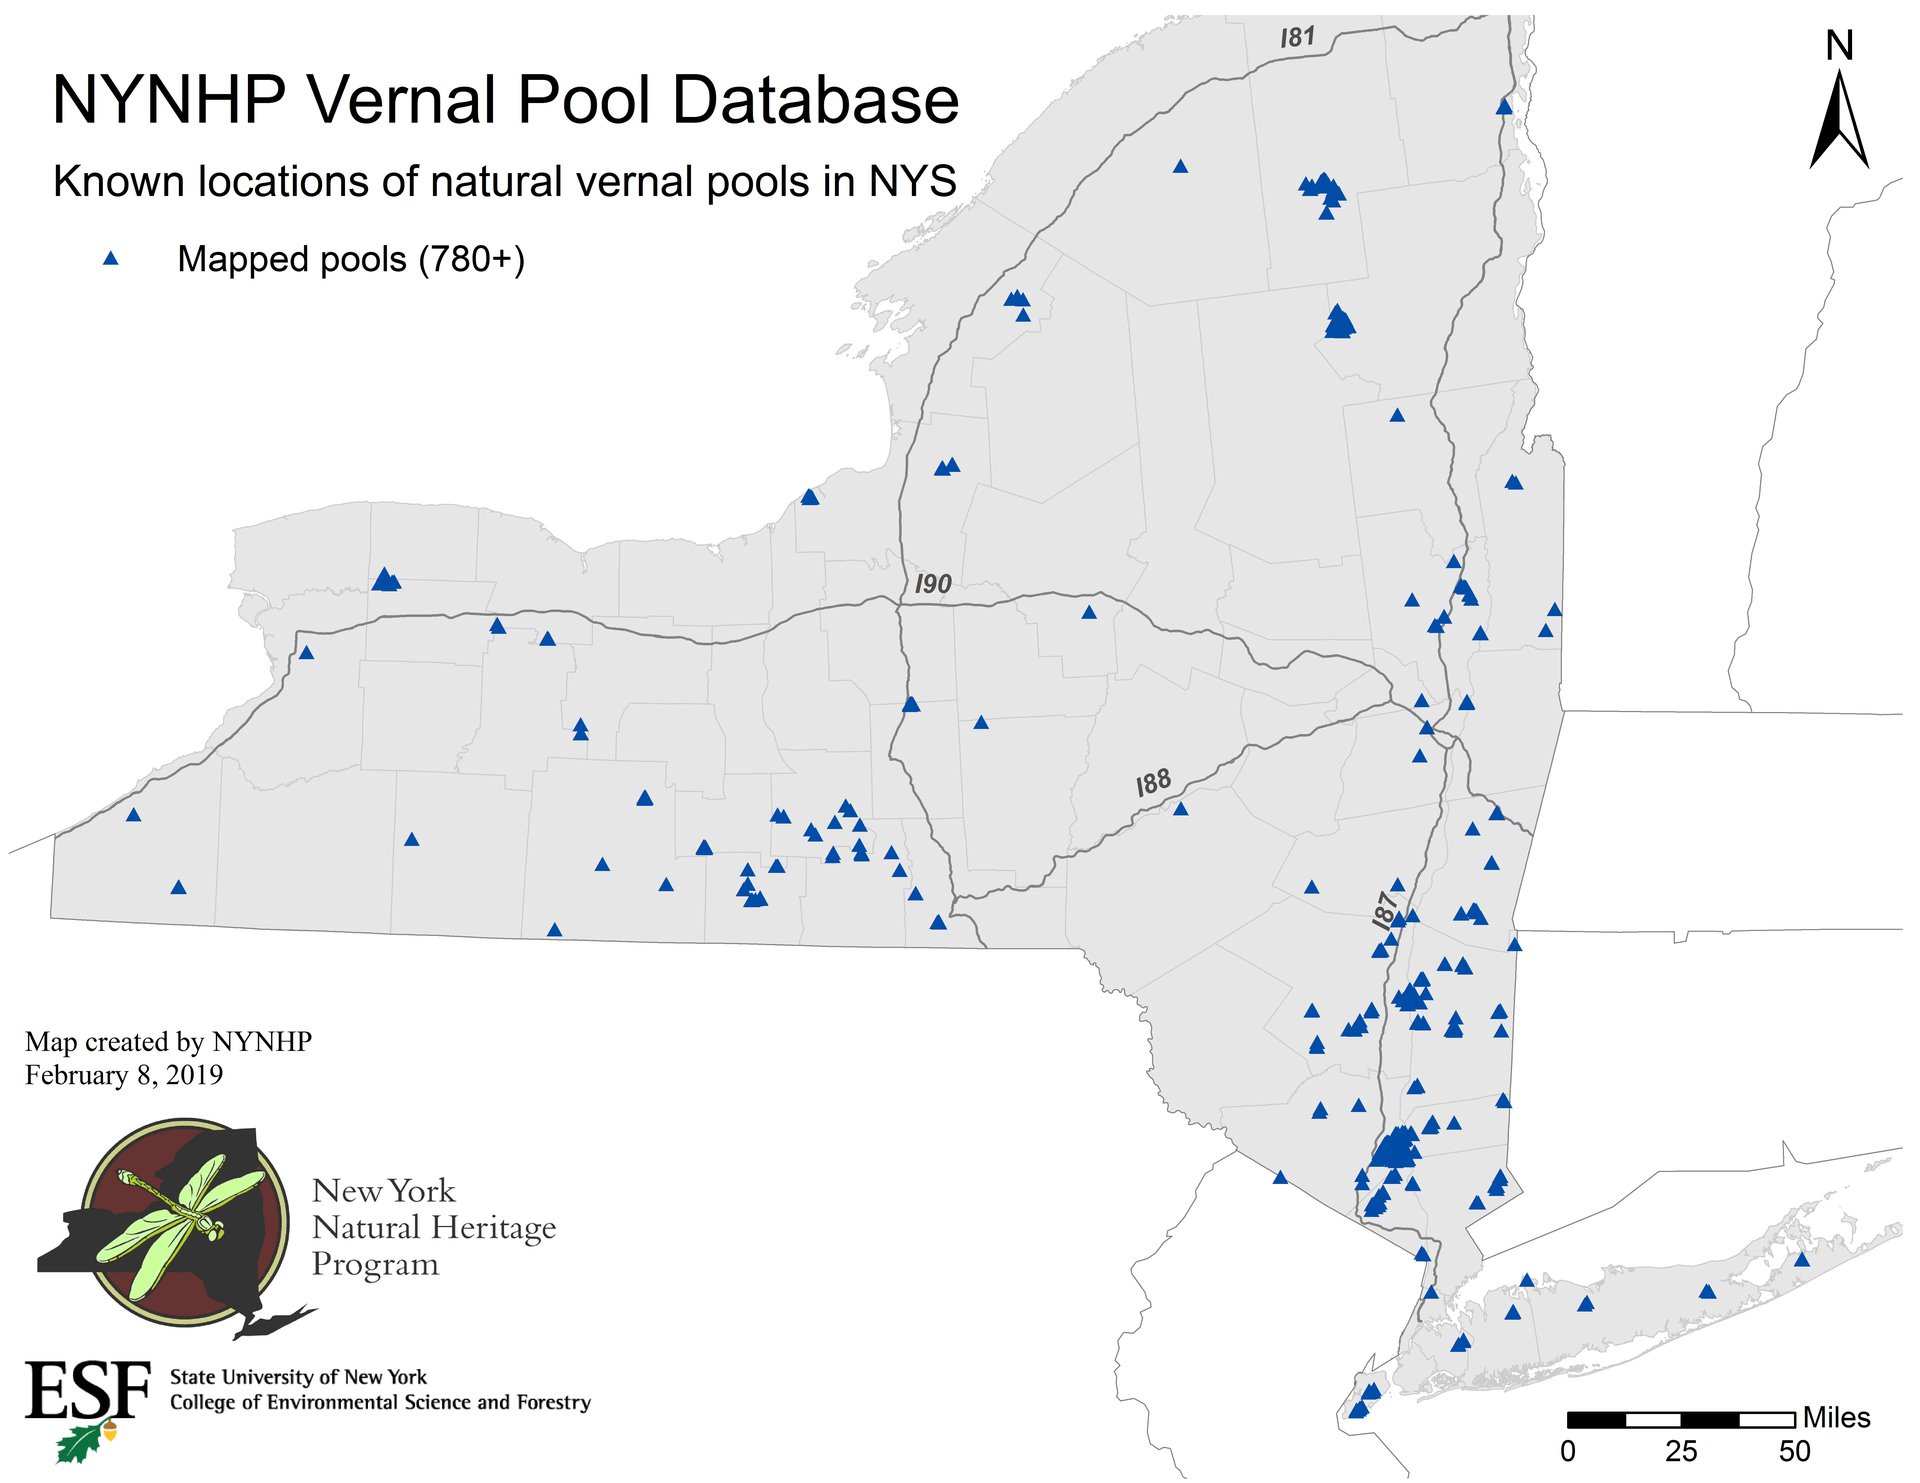 Vernal pool database statewide coverage (Last updated Feb 8, 2019).